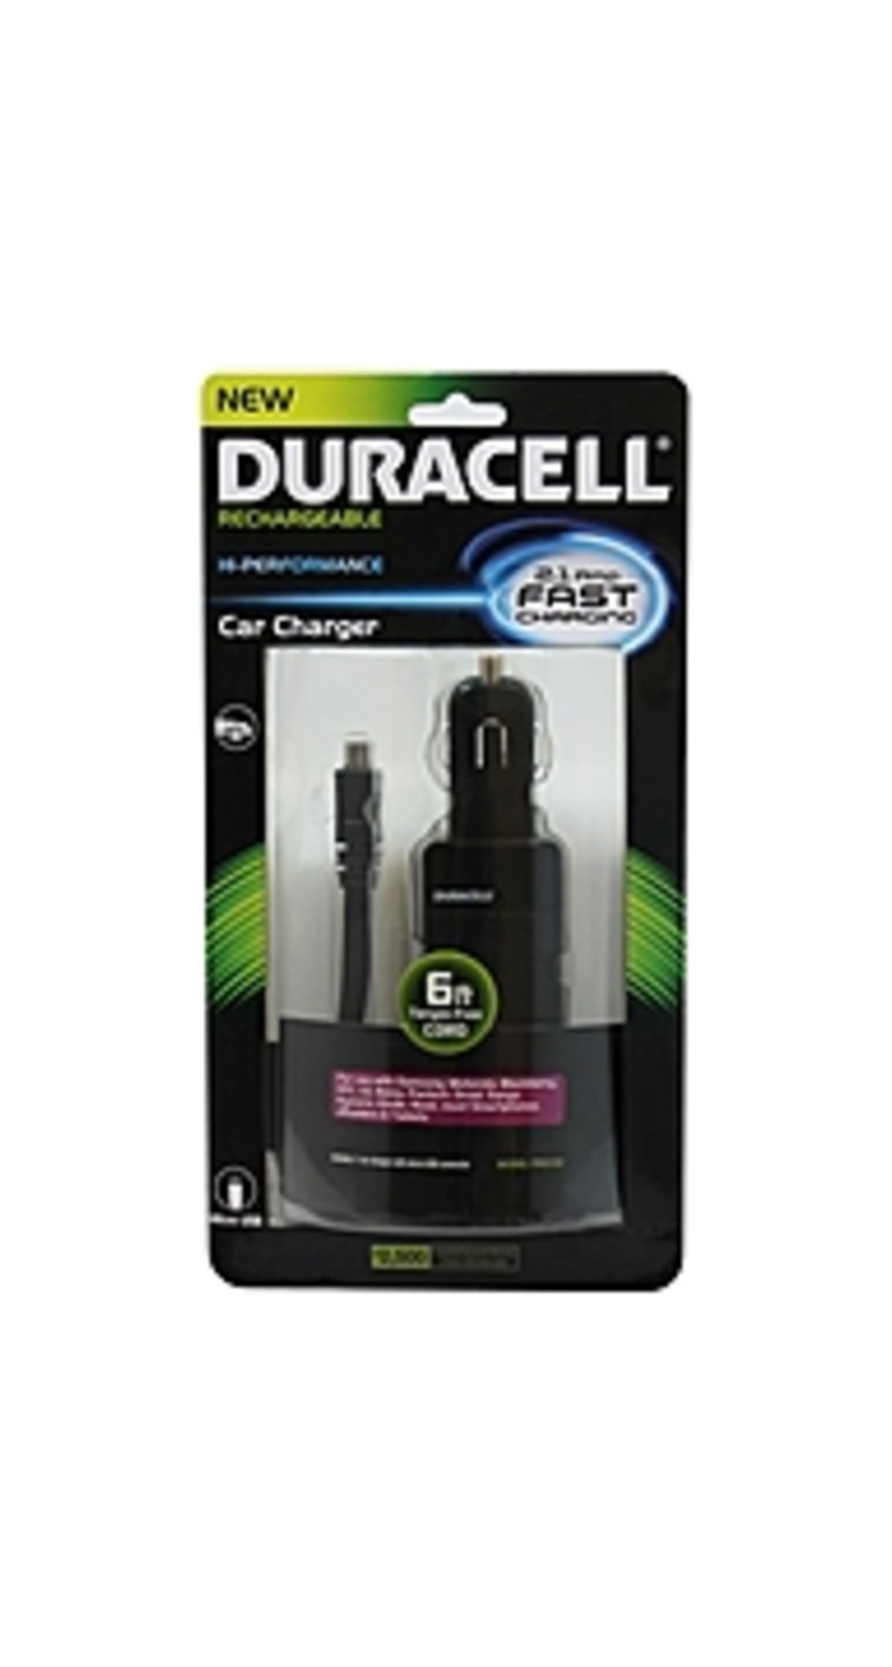 Duracell PRO152 Car Charger with Micro USB Connector and 6 Feet Tangle Free Cord - Black